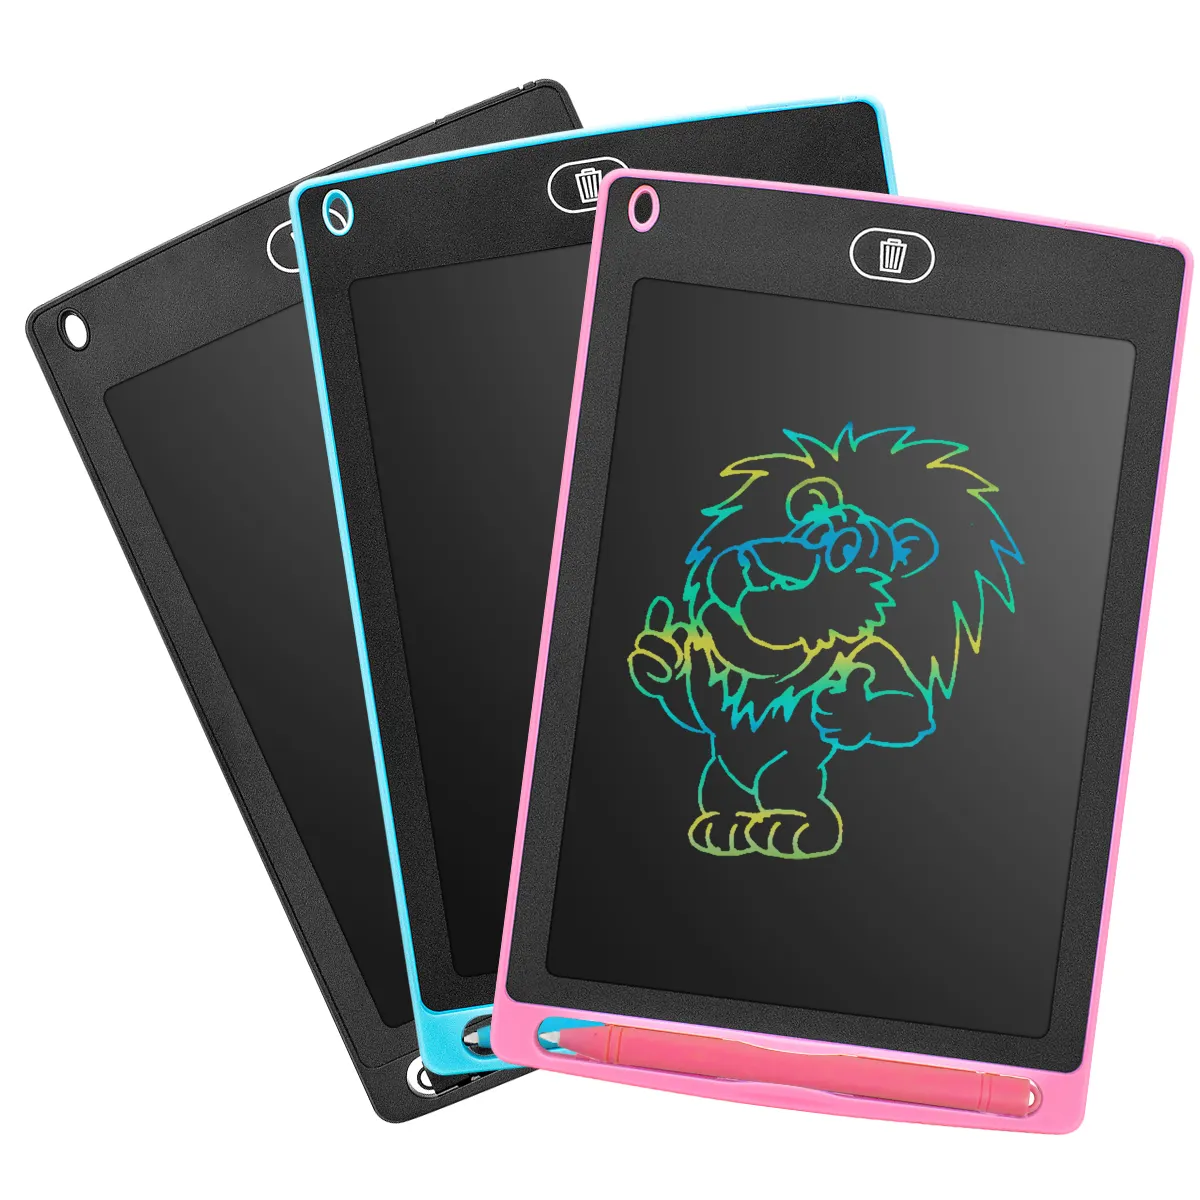 8.5 inch colorful digital LCD graphic Writing drawing doodle Scribbler board pad tablet Christmas gifts memo pad